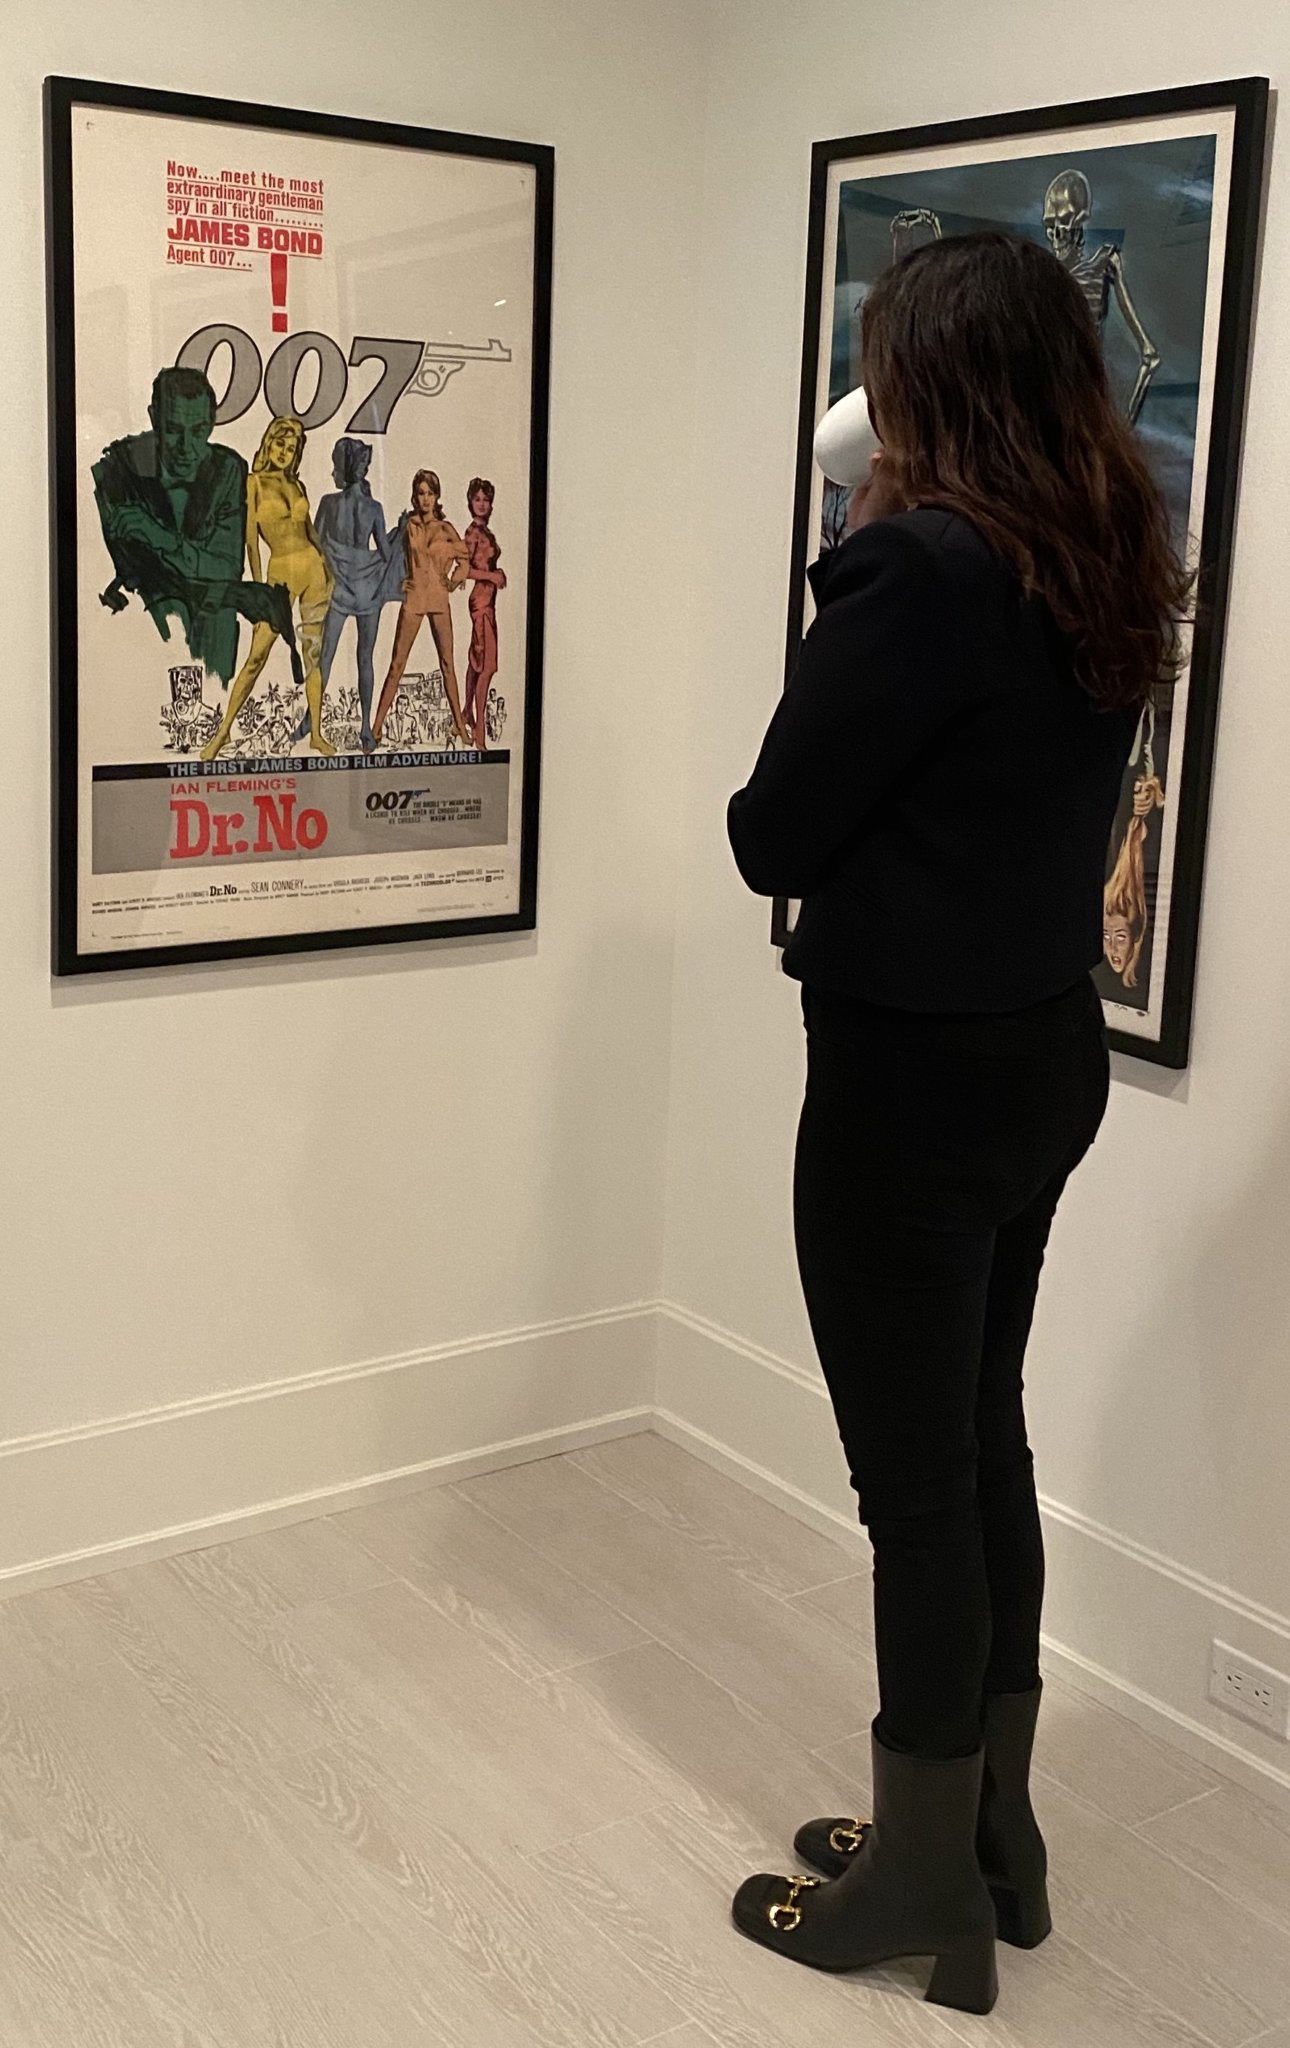 Geraldo Rivera’s wife Erica Levy checks Bill O'Reilly’s collection of original old movie posters at his home in Montauk